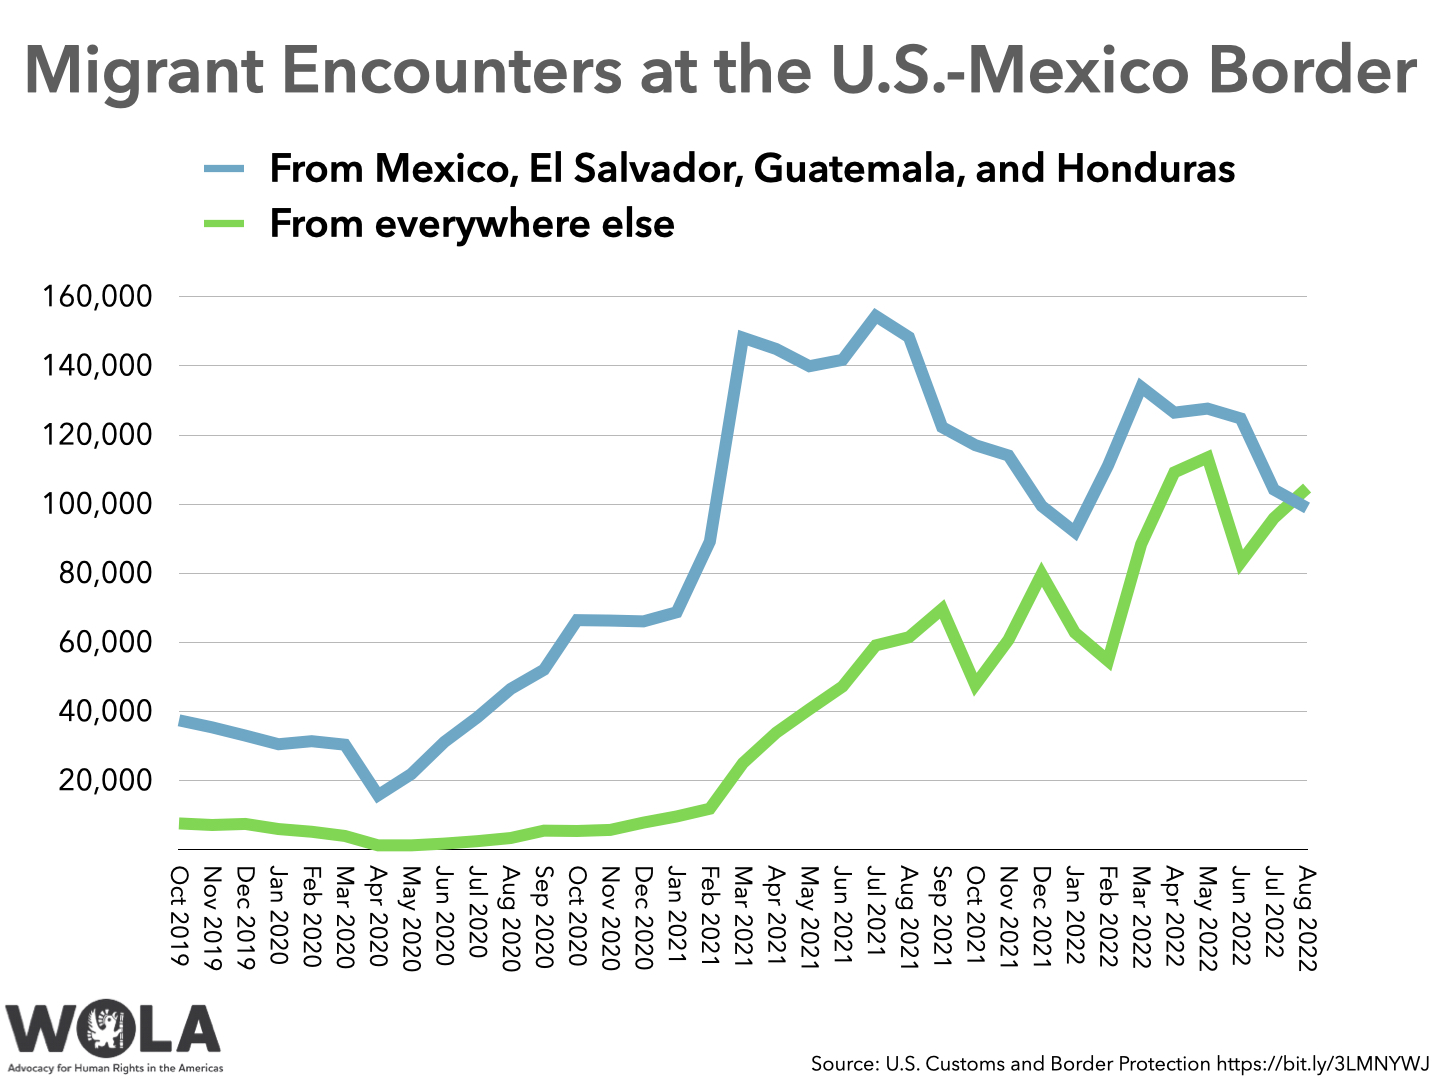 Migrant Encounters from Mexico and the Northern Triangle, and From